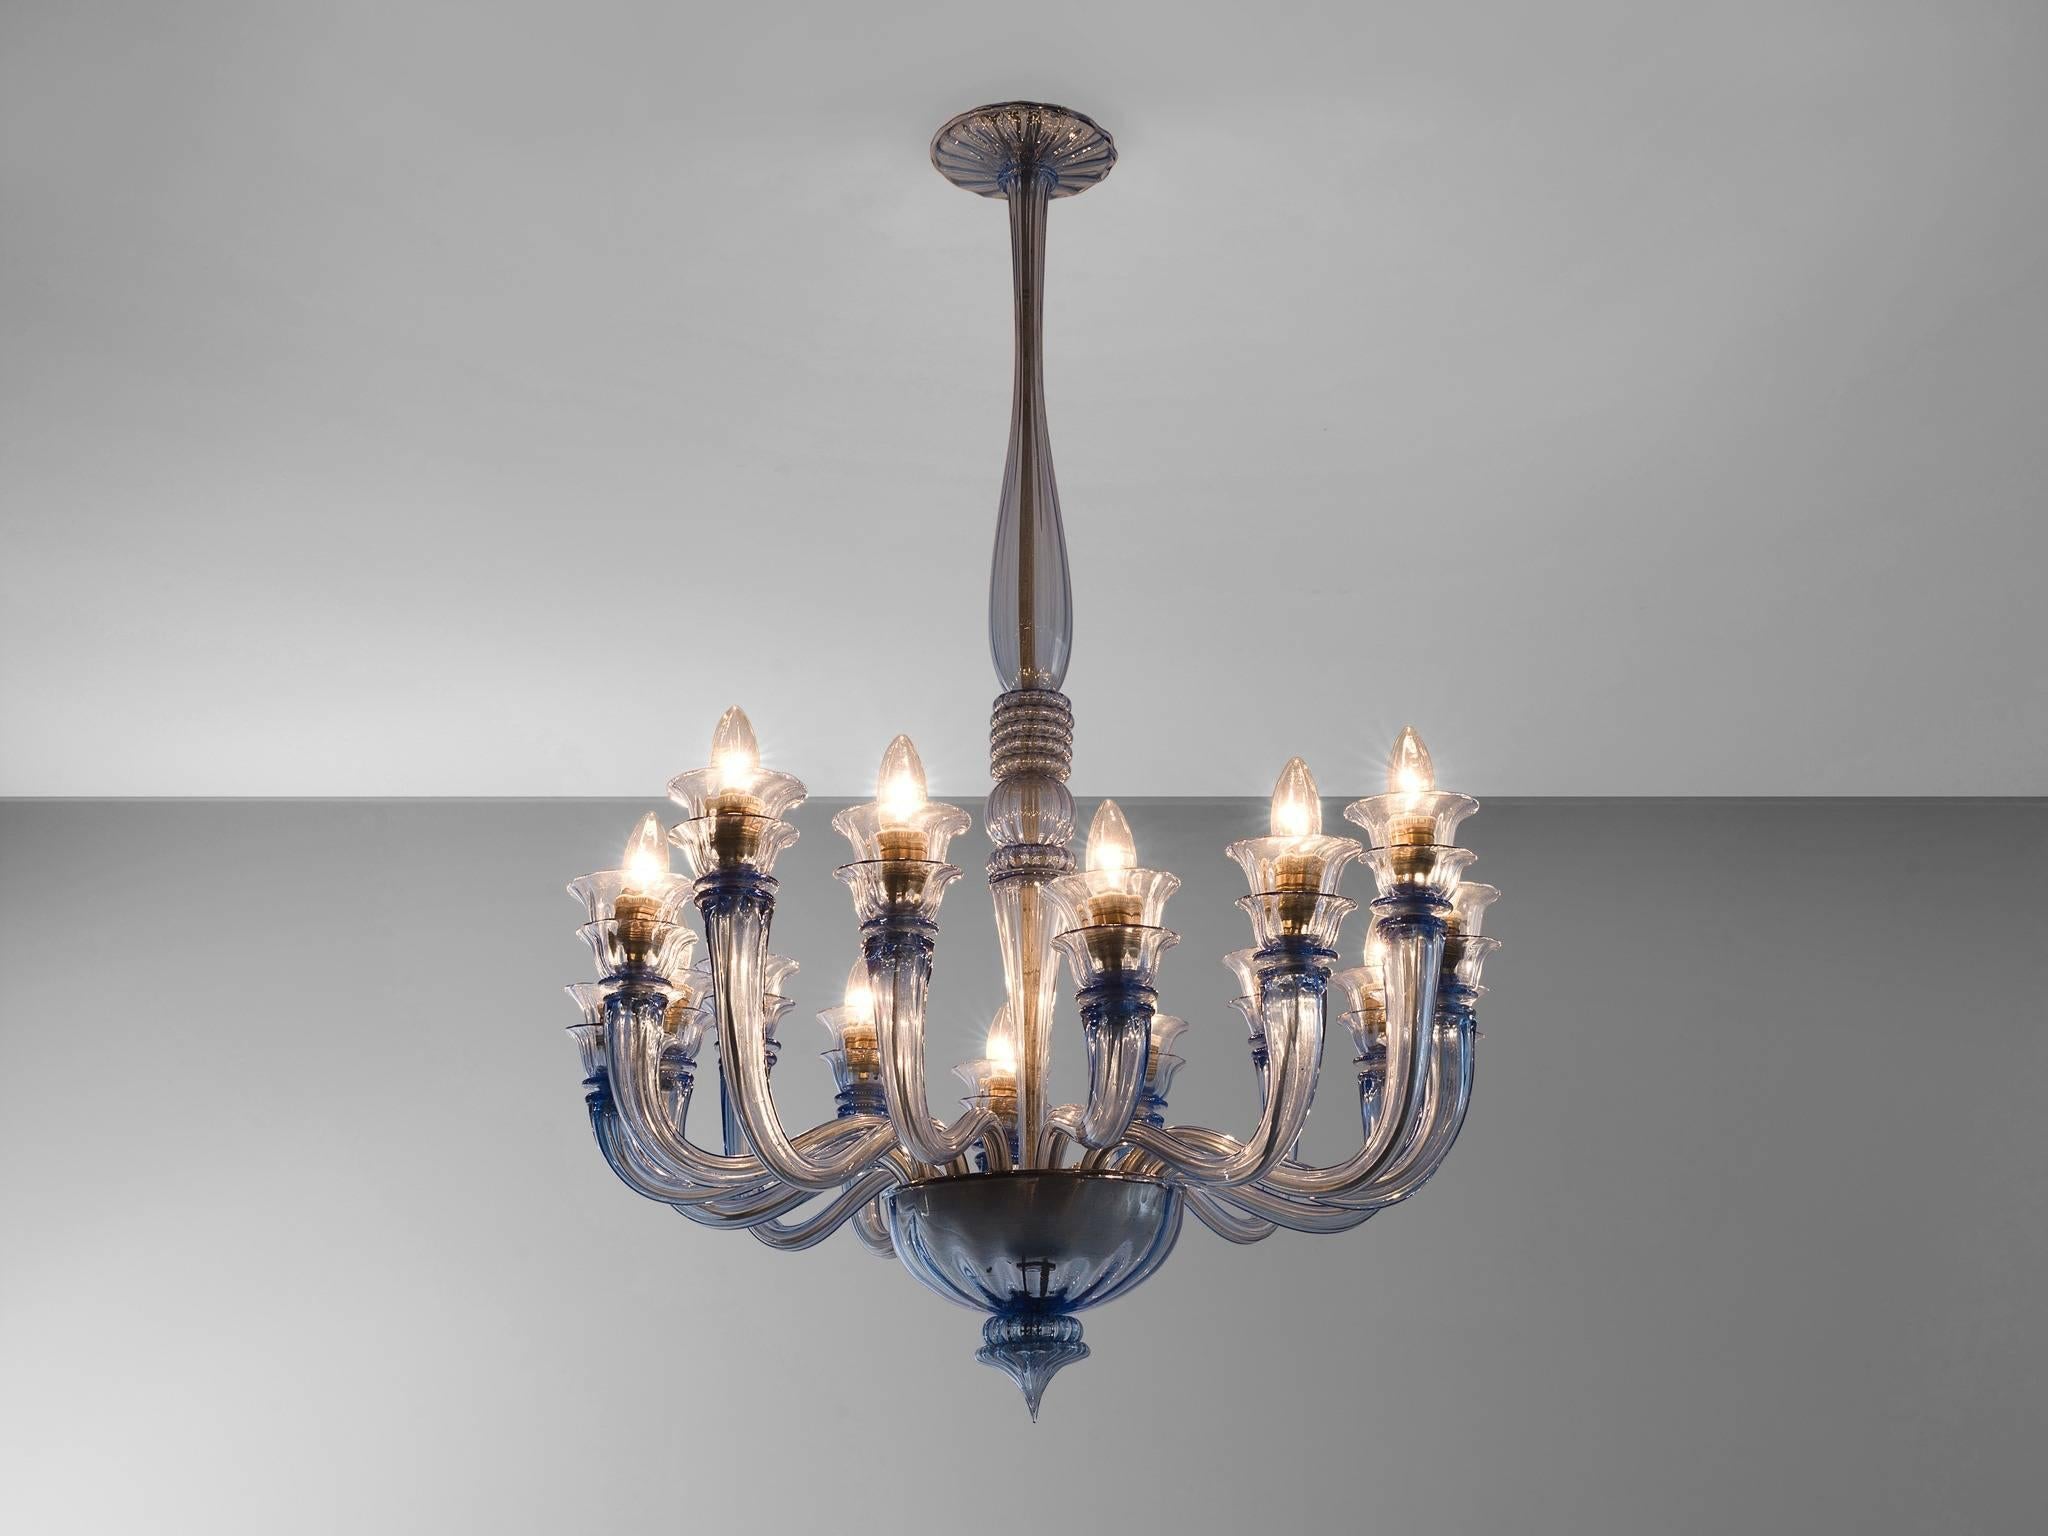 Venini chandelier, glass, Italy, 1930s.

This chandelier is blue colored glass features multiple, floral and biomorph features. These, and the colored glass are classic features of Venini. The chandelier is an eyecatcher and creates a stunning